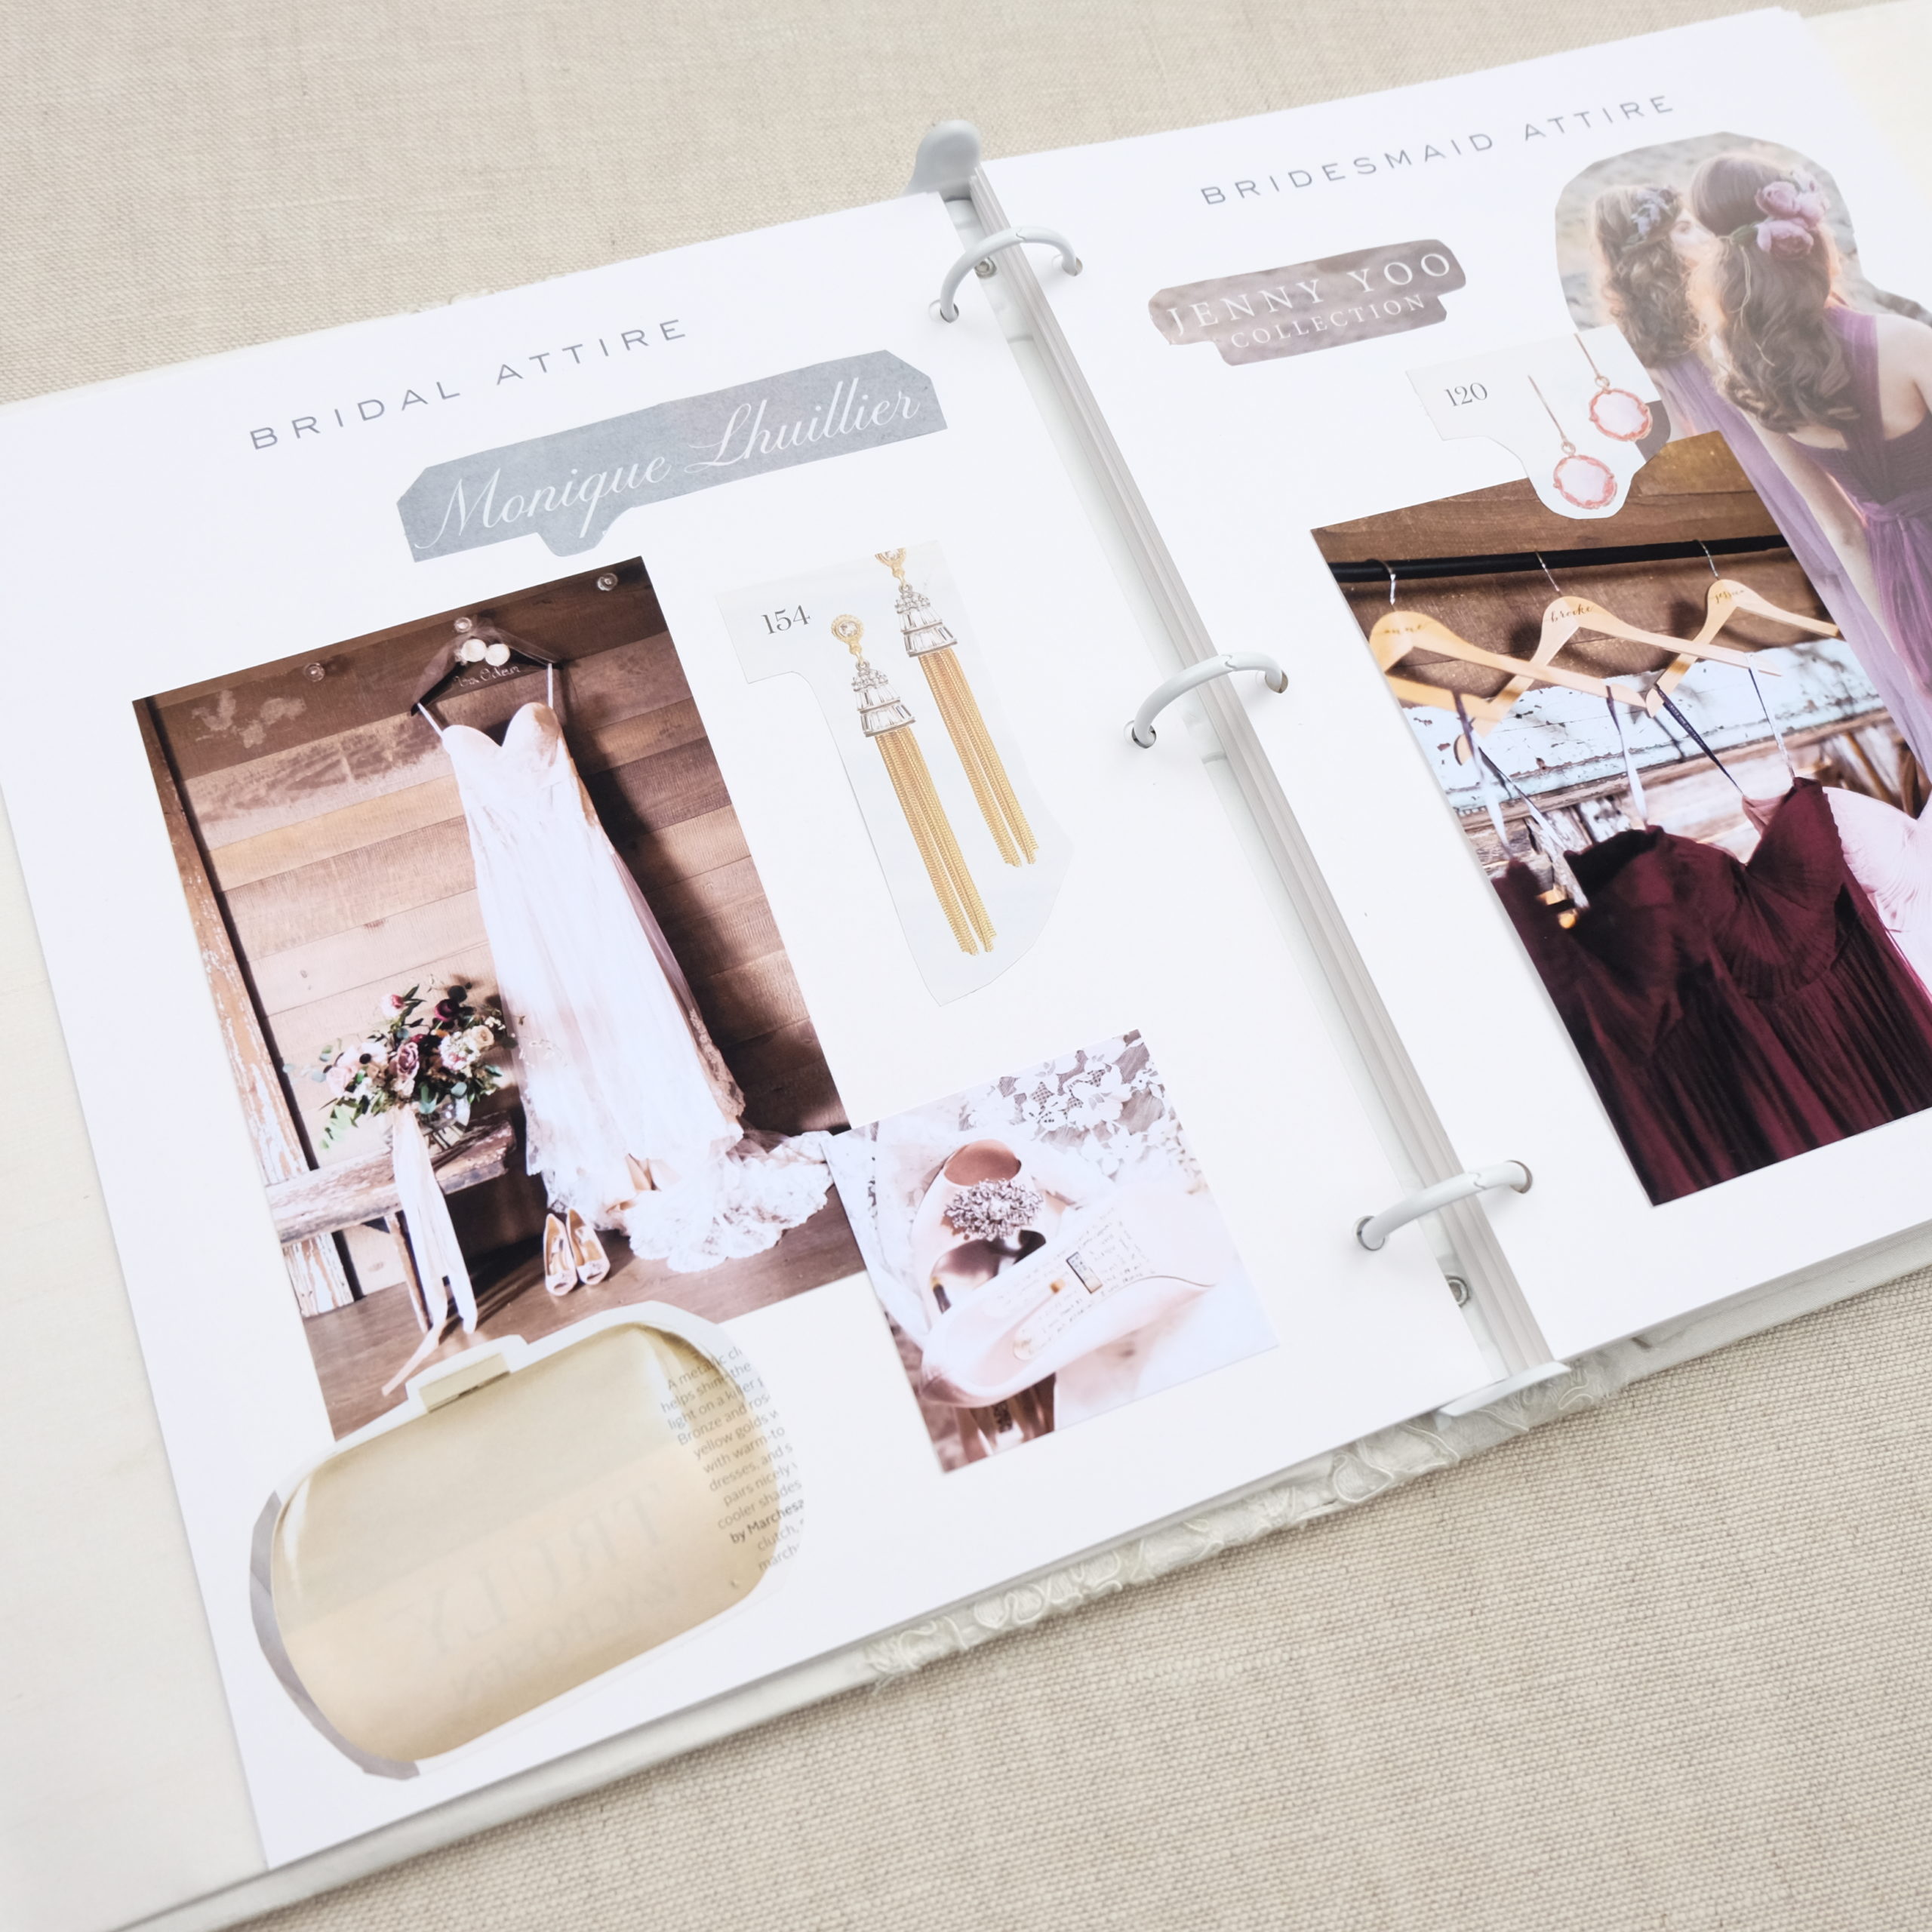 Scrapbook for the Bride: A Sweet Gift from the Bridesmaids